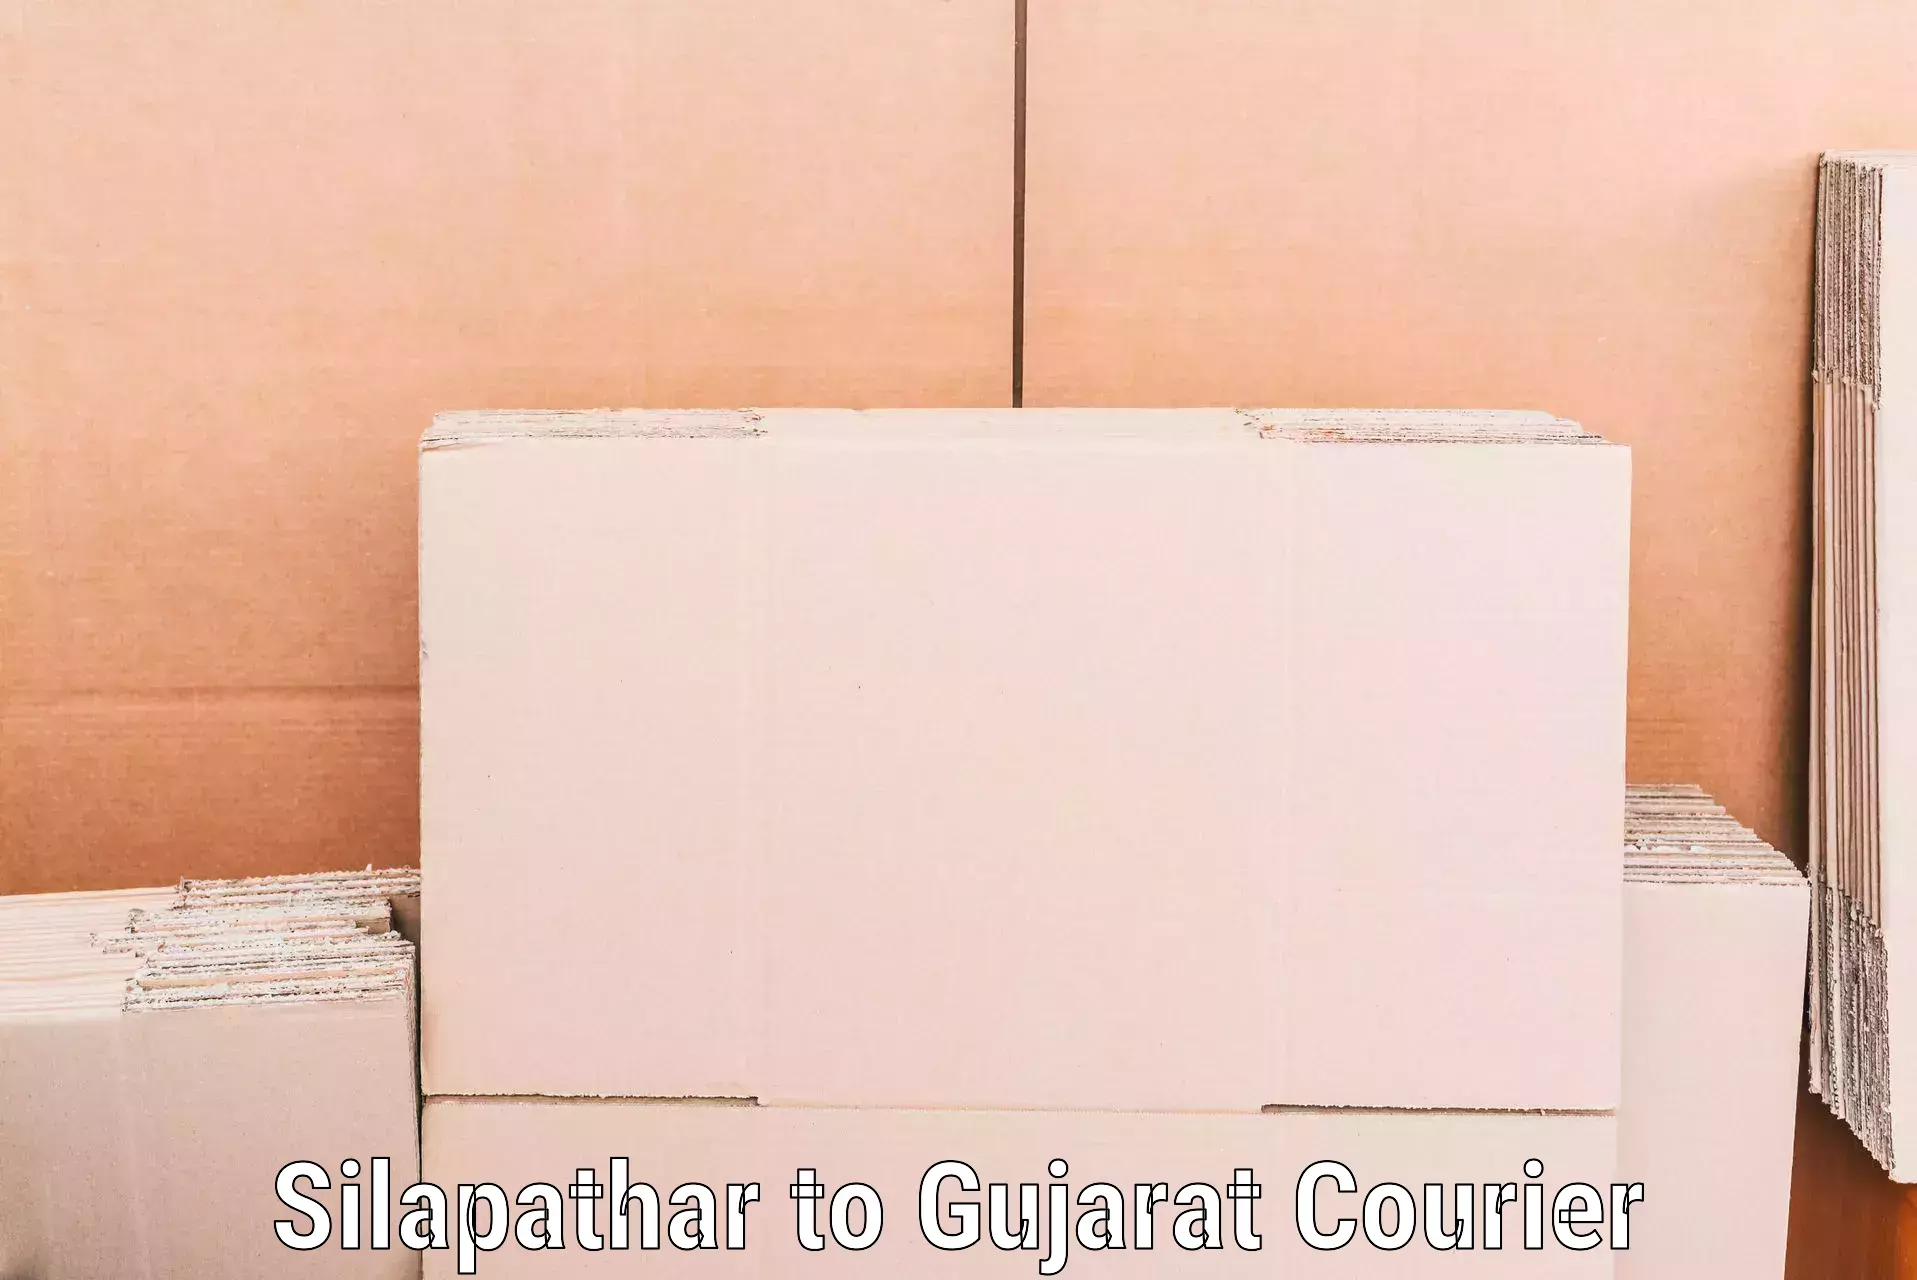 Home relocation experts Silapathar to Gujarat